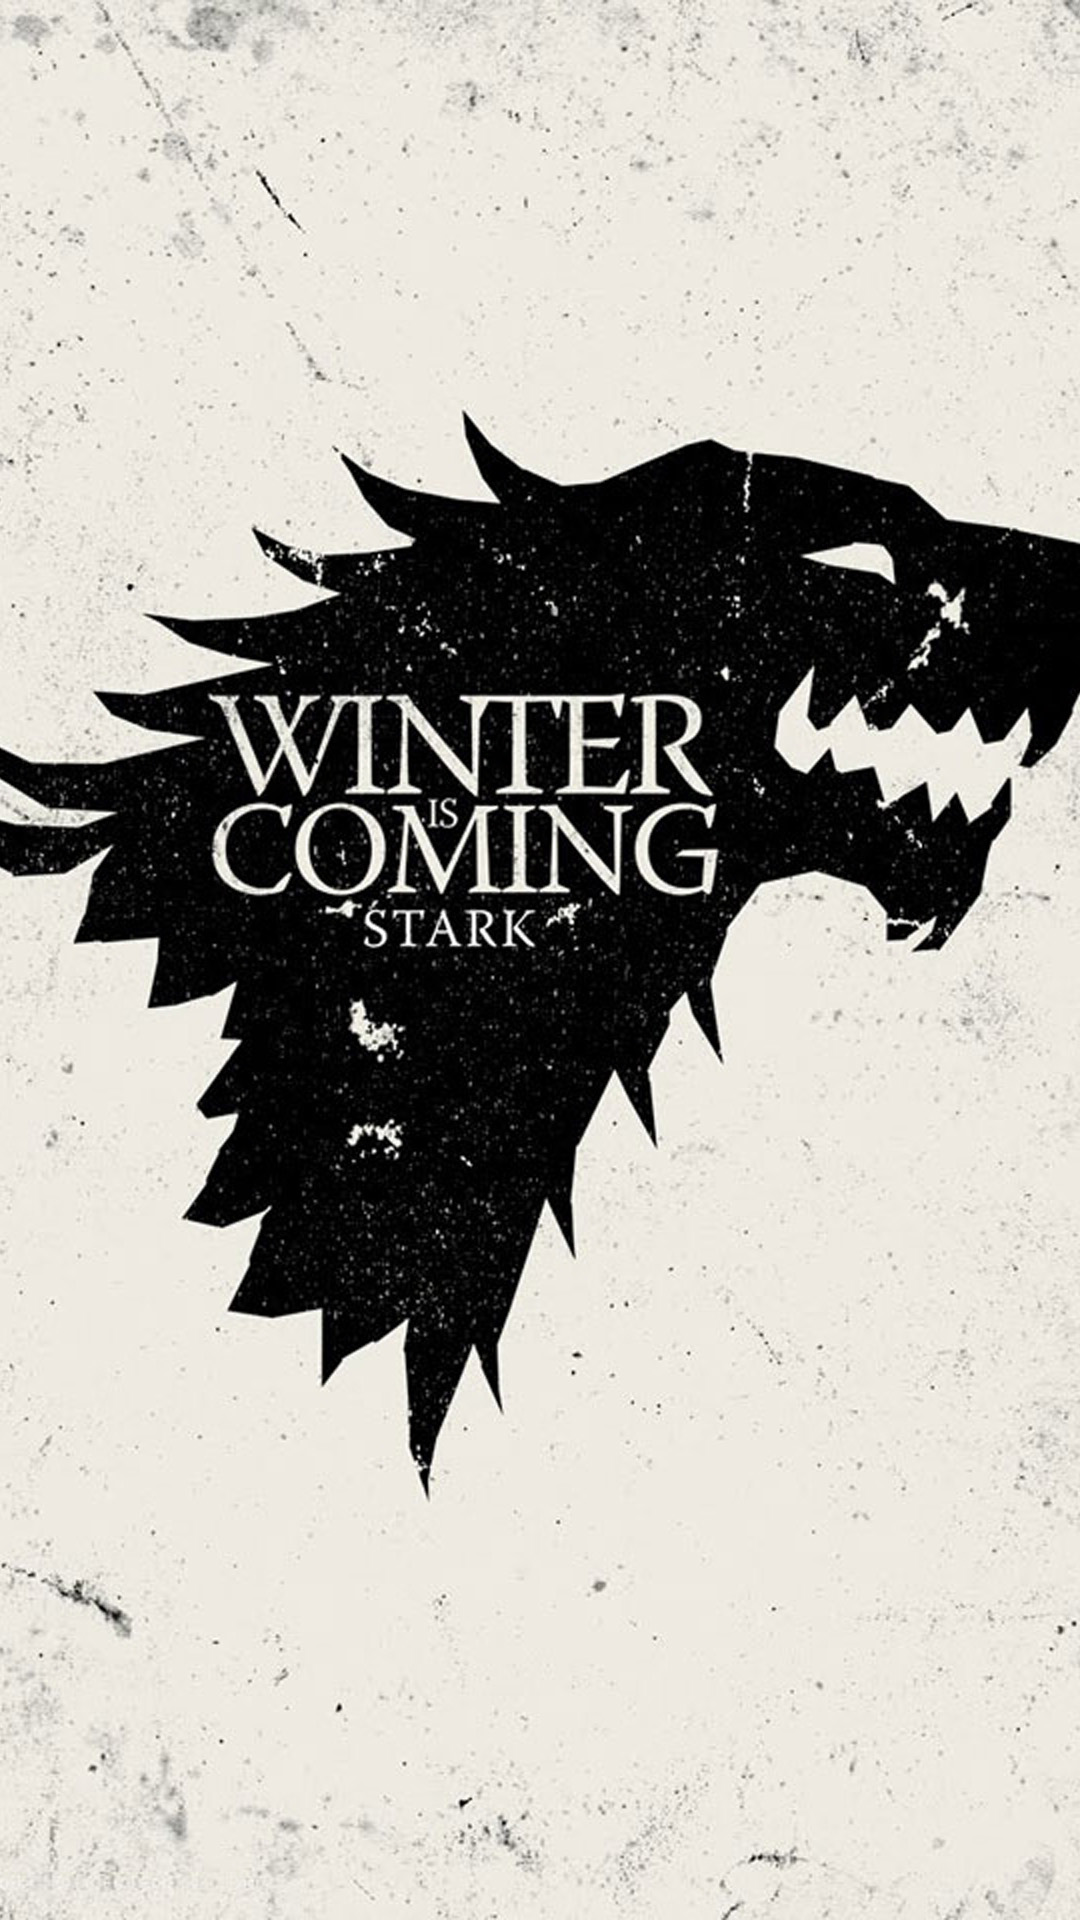 Winter Is Coming ゲーム オブ スローンズのiphone壁紙 Iphone Wallpapers